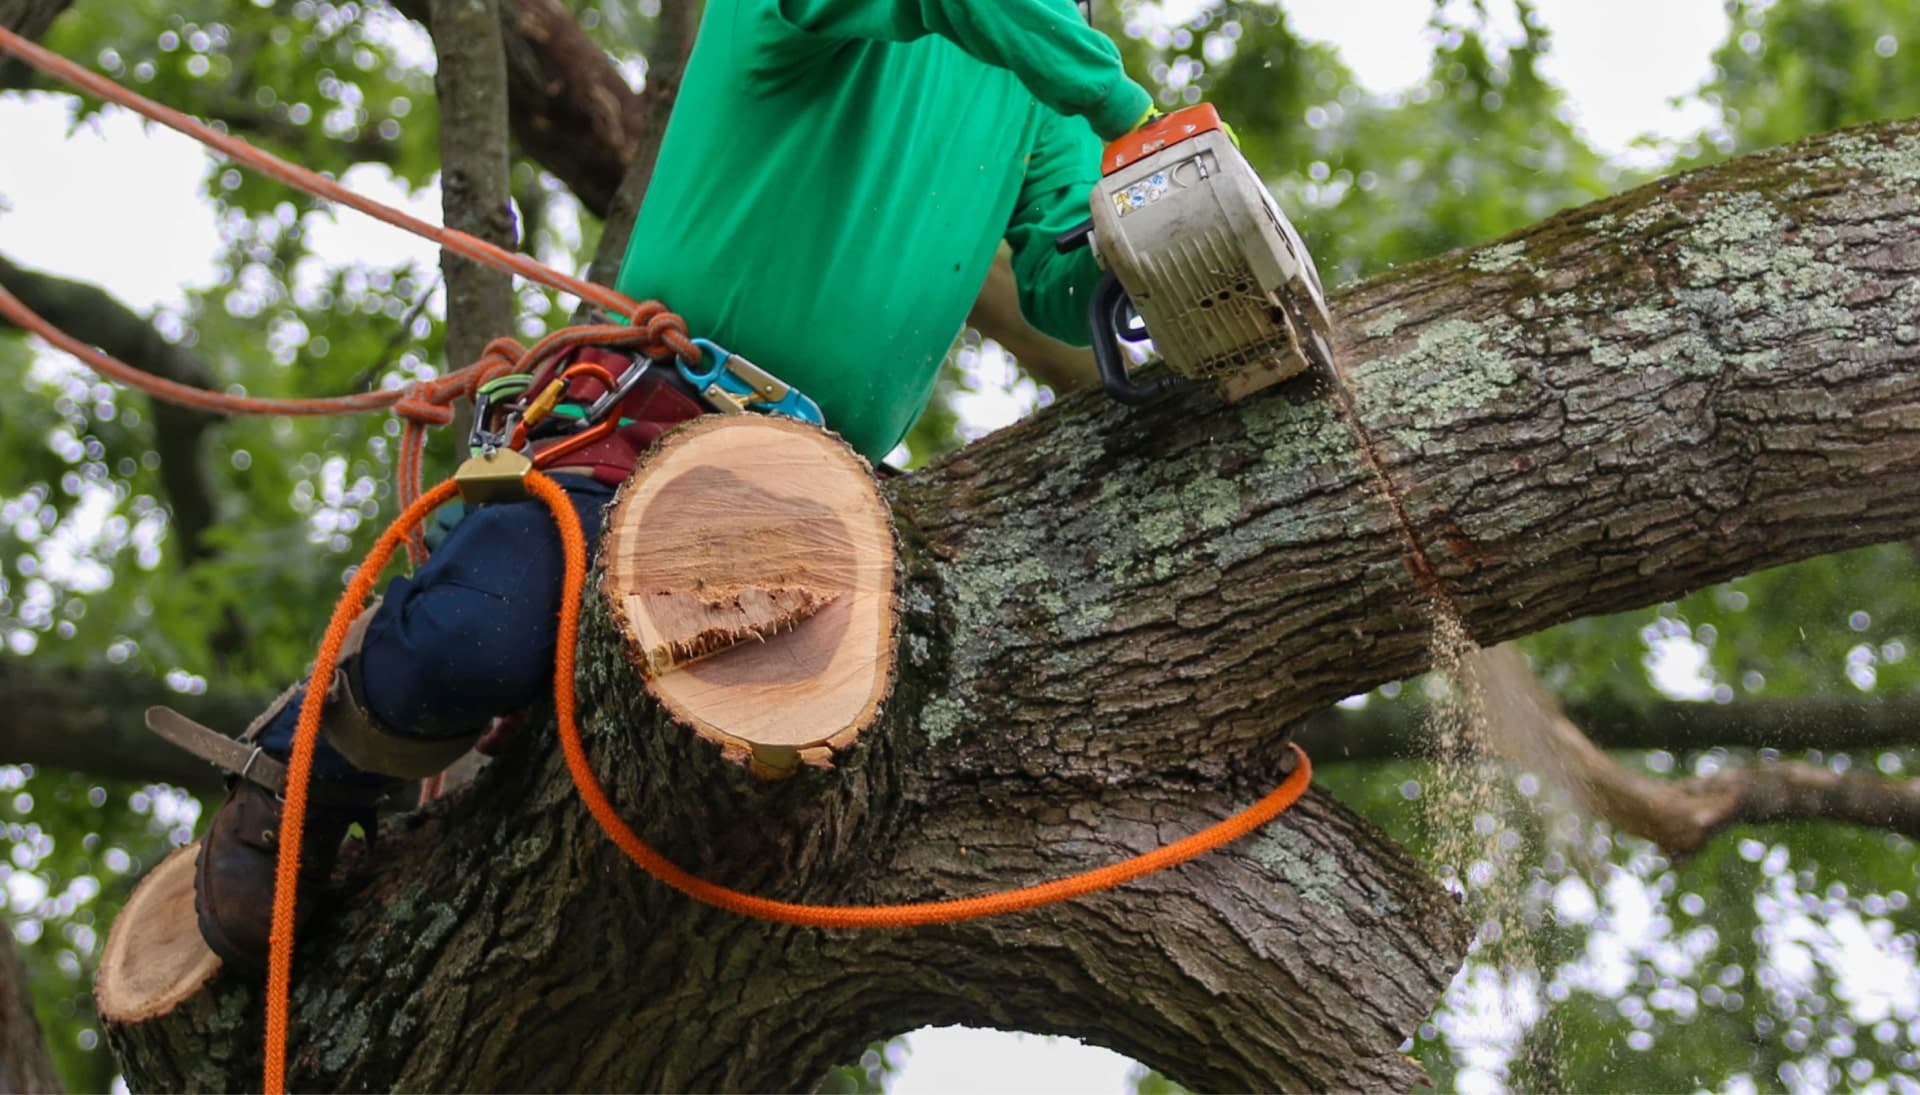 Shed your worries away with best tree removal in Olympia